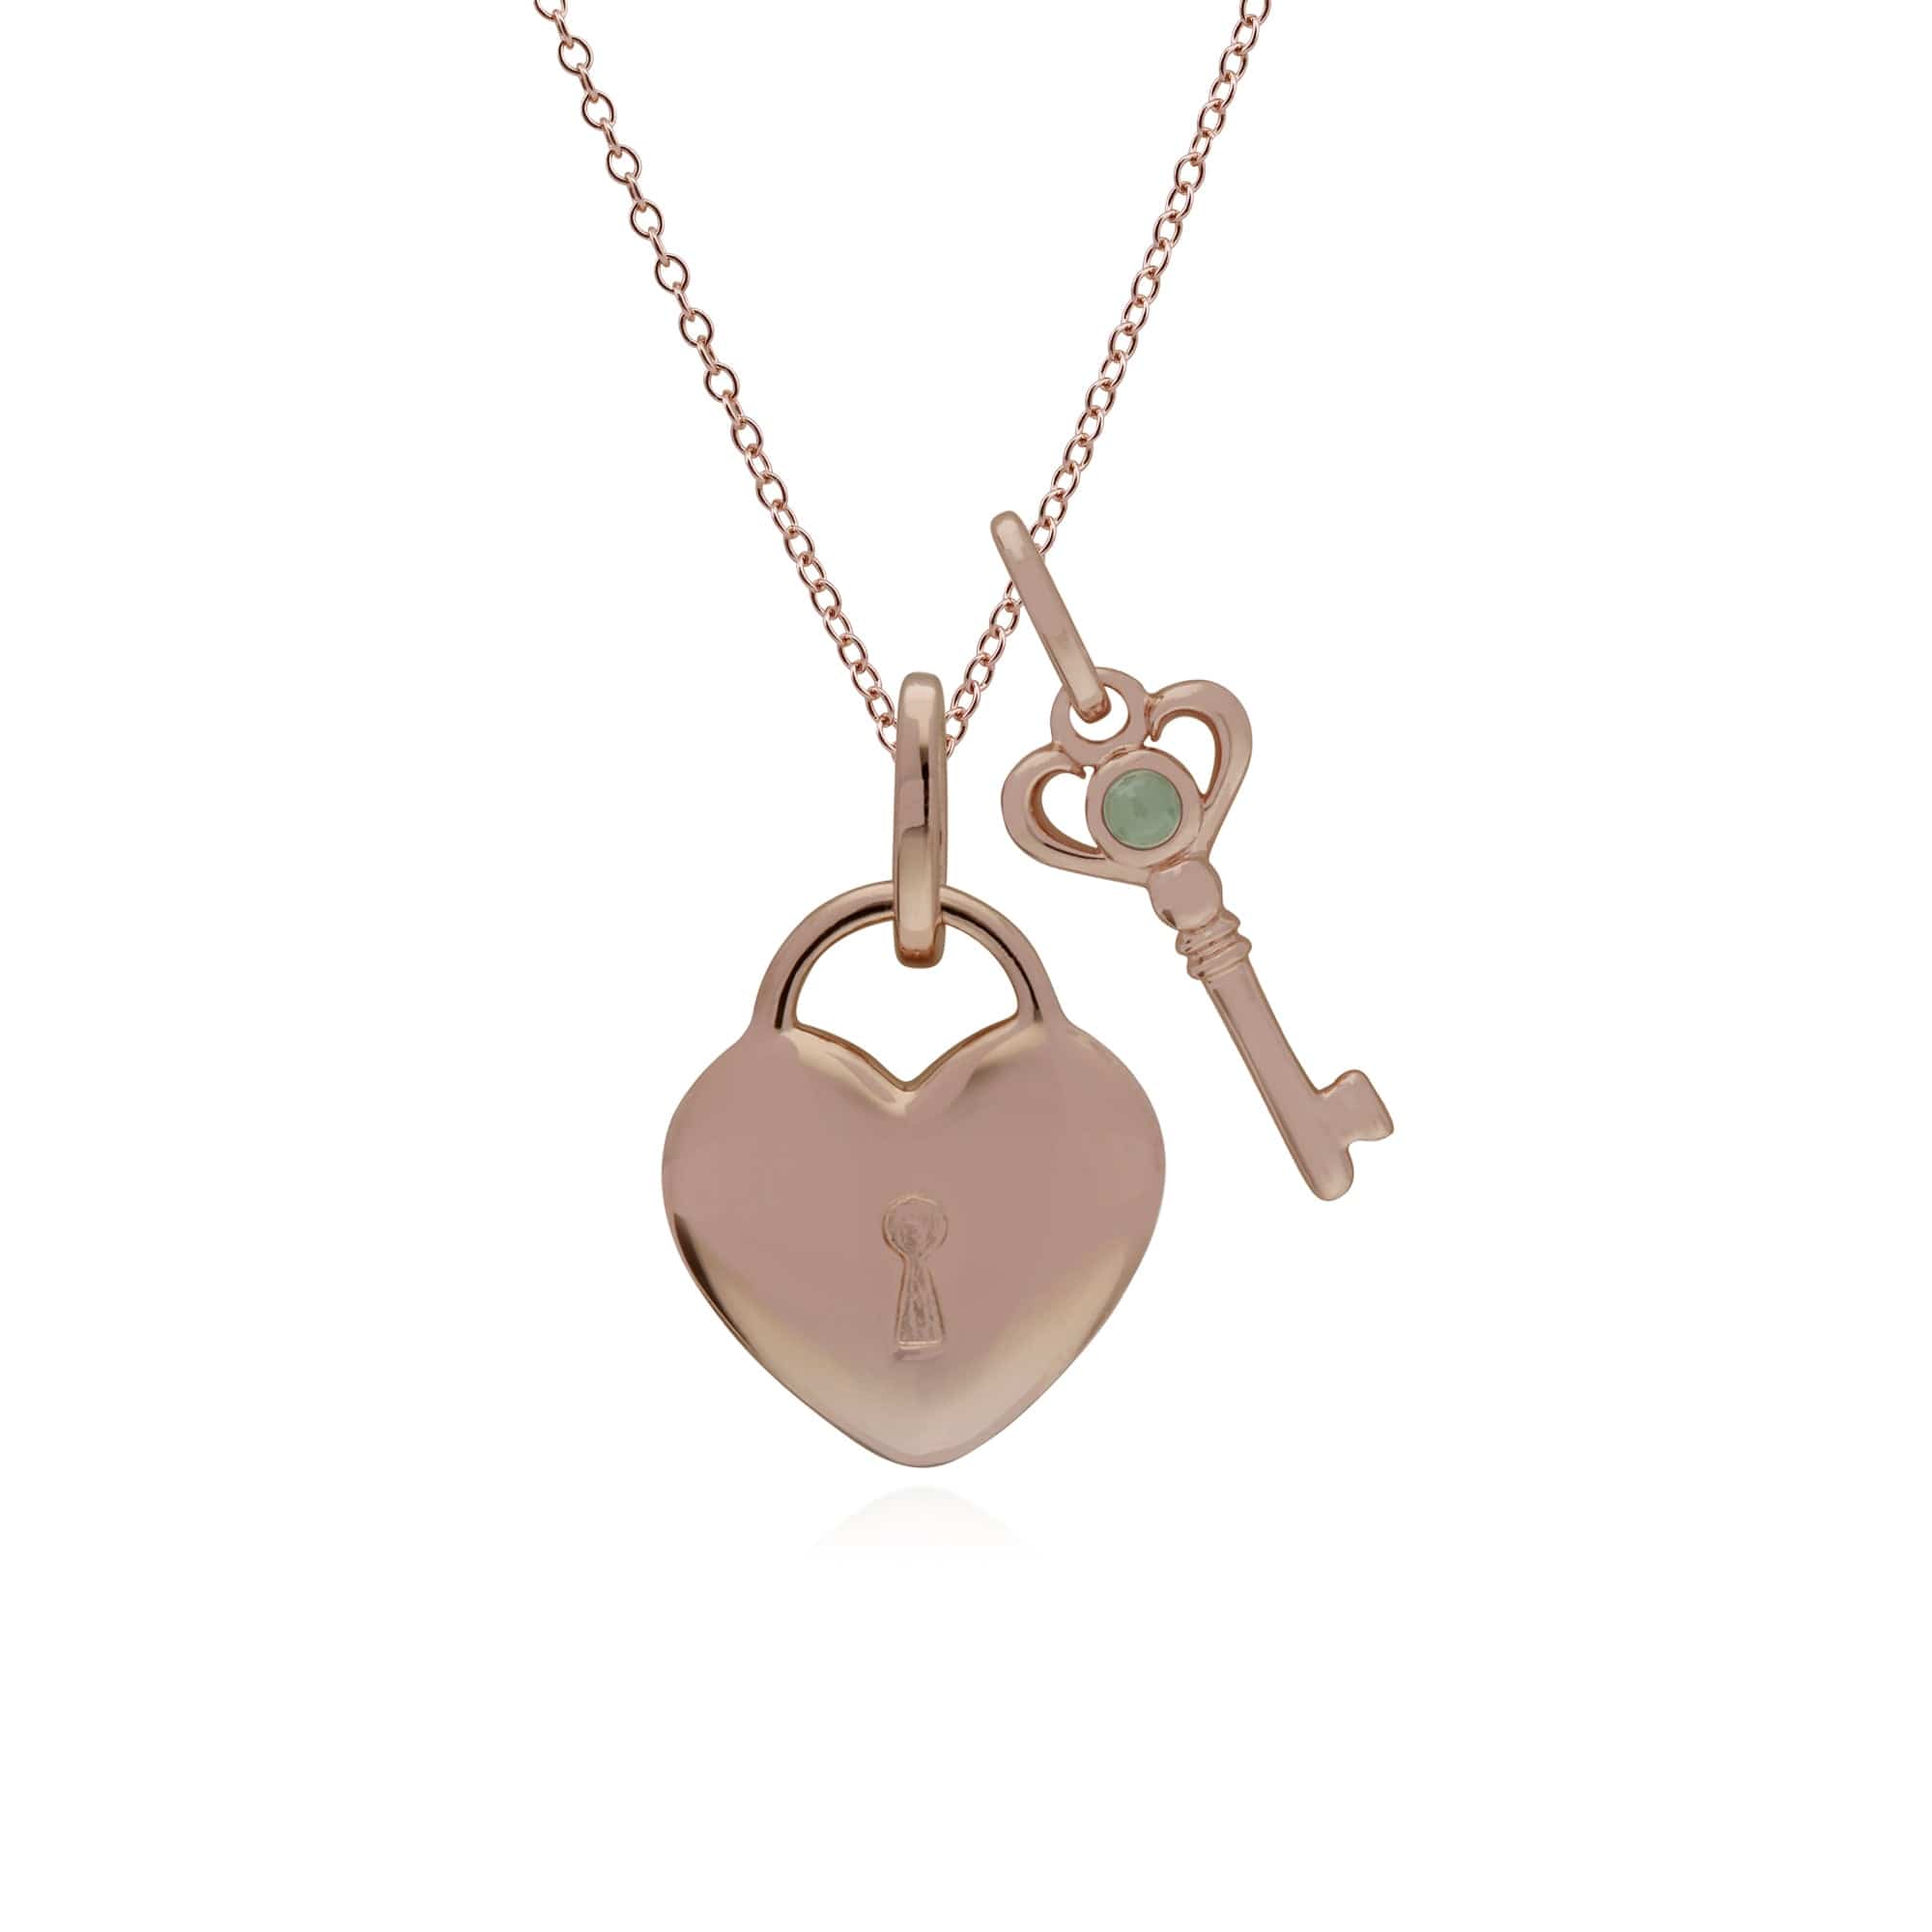 270P028603925-270P026901925 Classic Heart Lock Pendant & Jade Key Charm in Rose Gold Plated 925 Sterling Silver 1